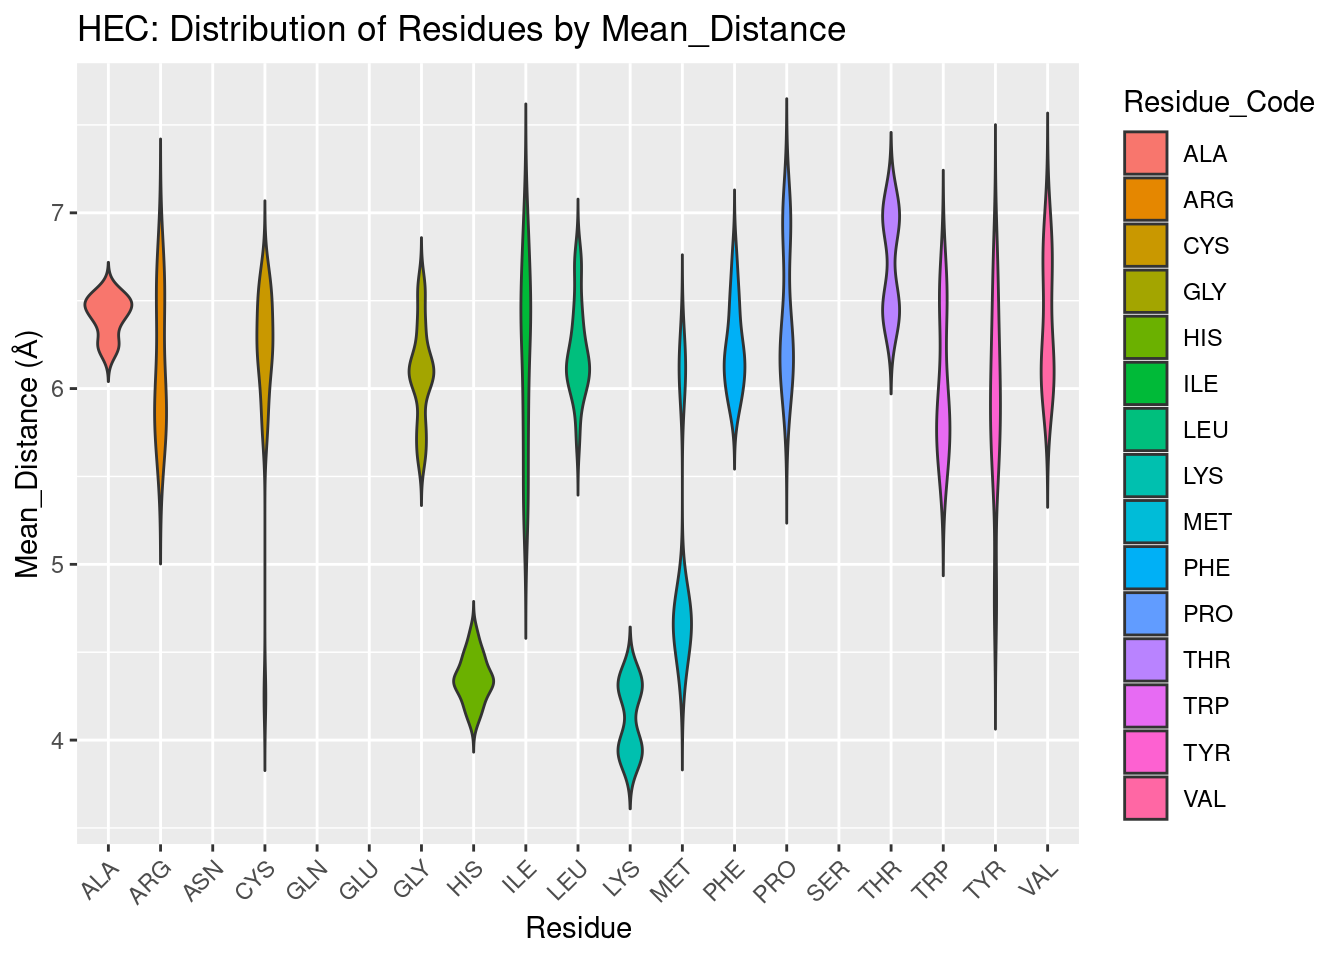 HEC: Residue Distribution by Distance